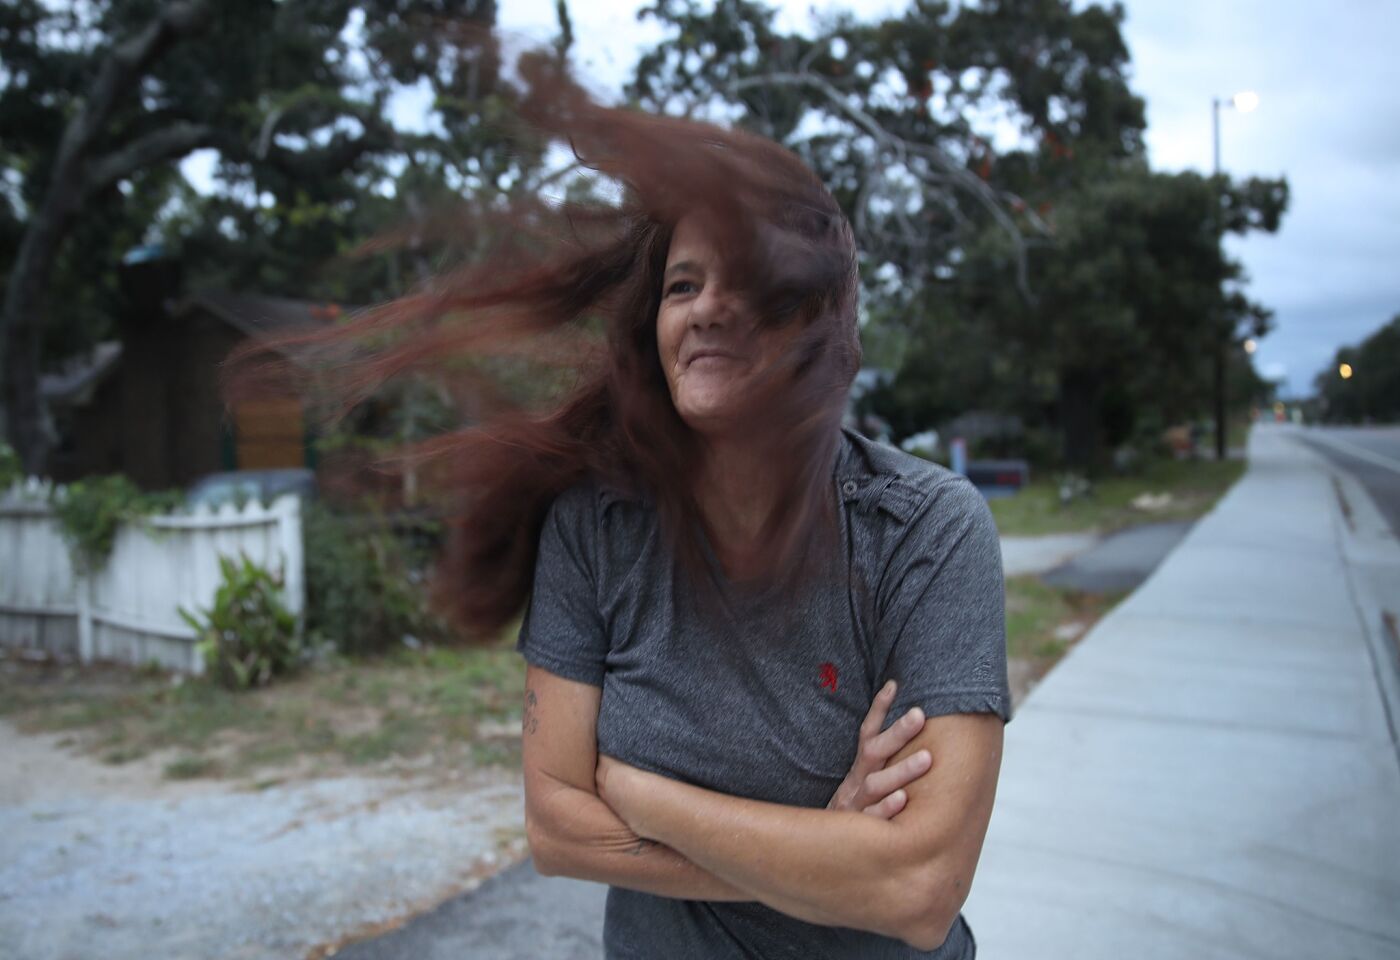 Linda Stephens checks out the weather as the force of Hurricane Florence is beginning to be felt in Myrtle Beach, S.C.